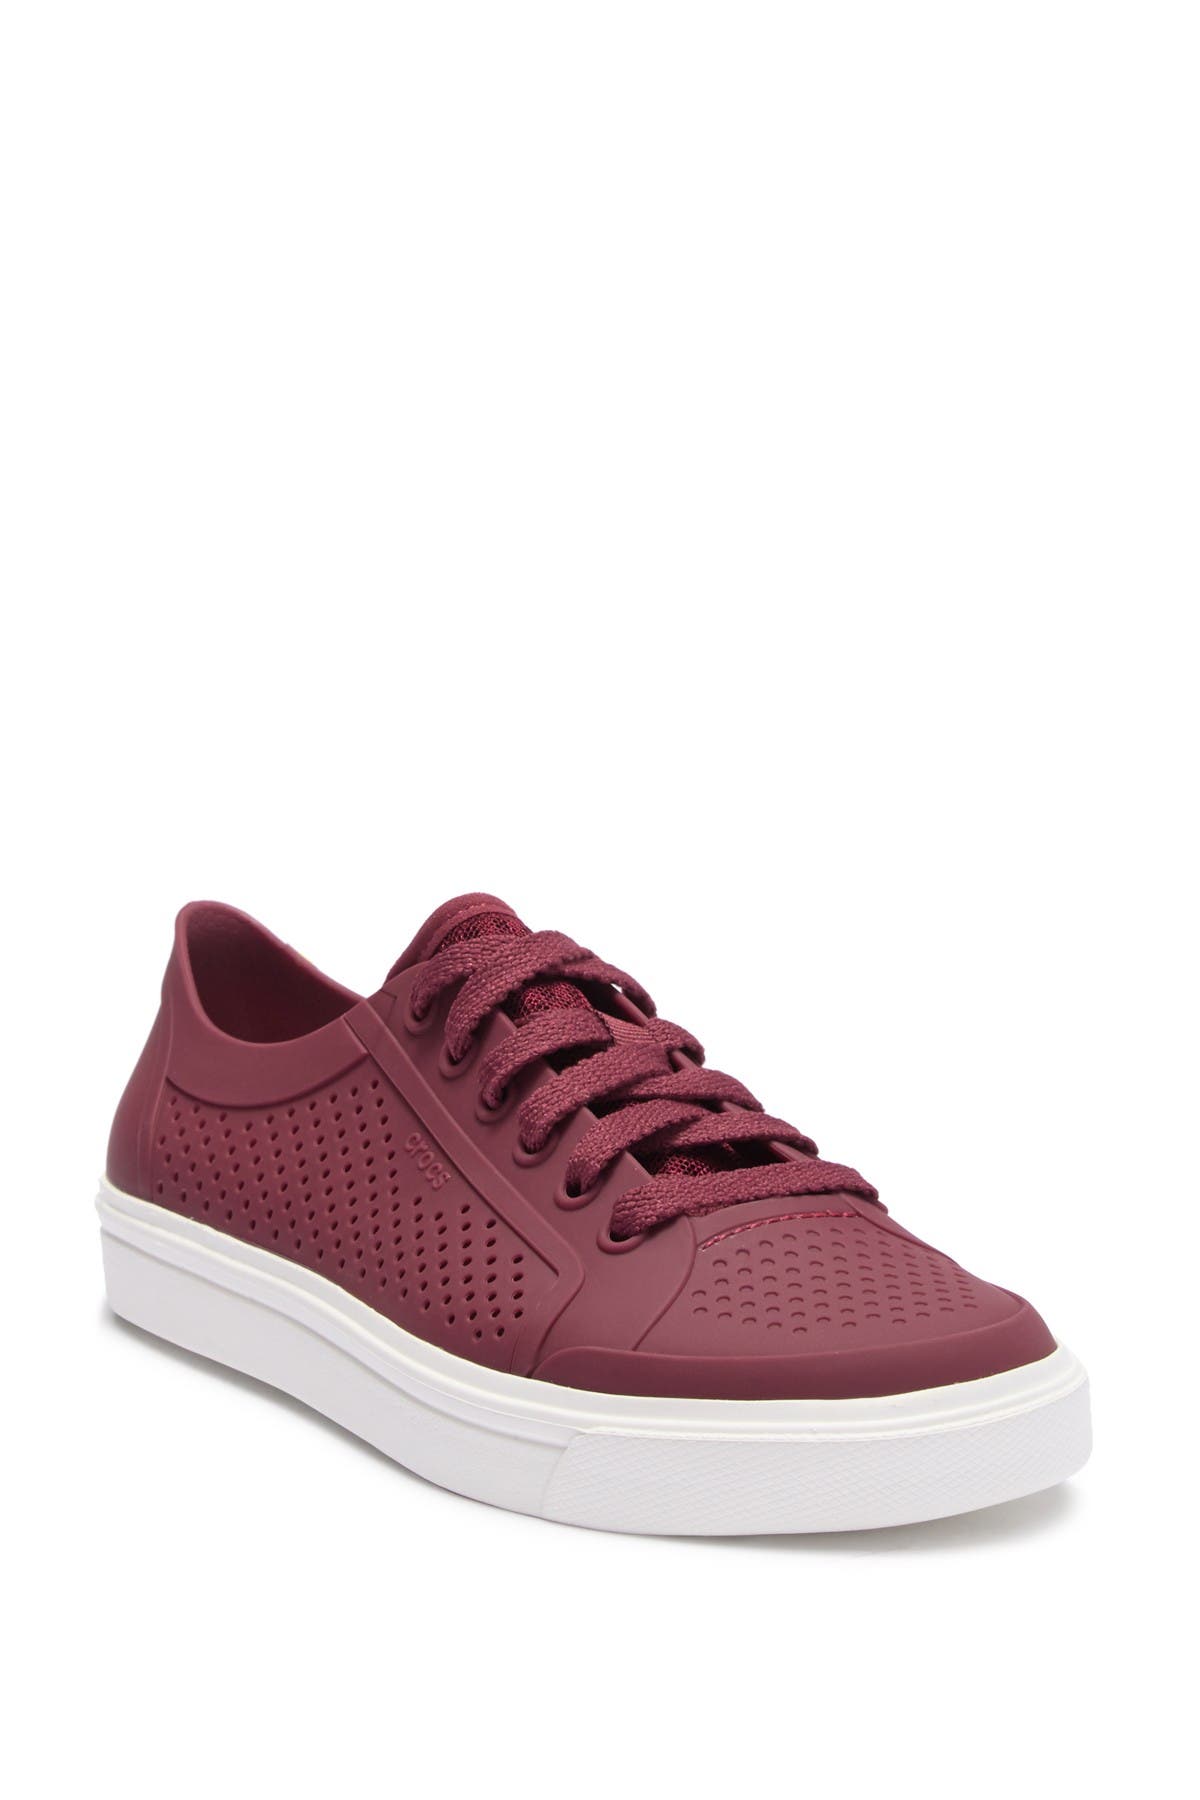 crocs lace up sneakers